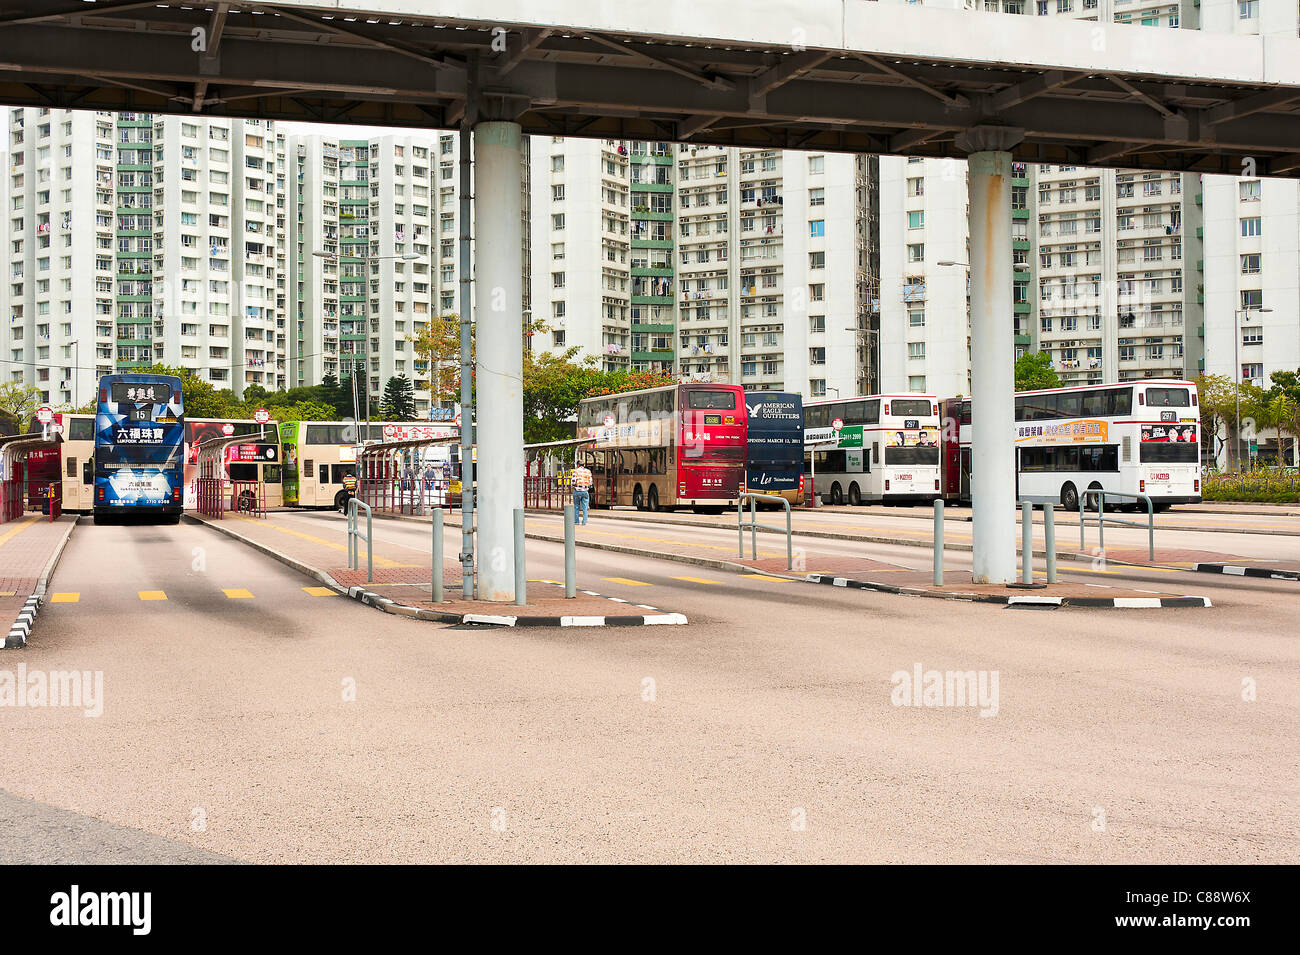 The Bus Station with Parking Stands in Kowloon Hong Kong China Asia Stock Photo